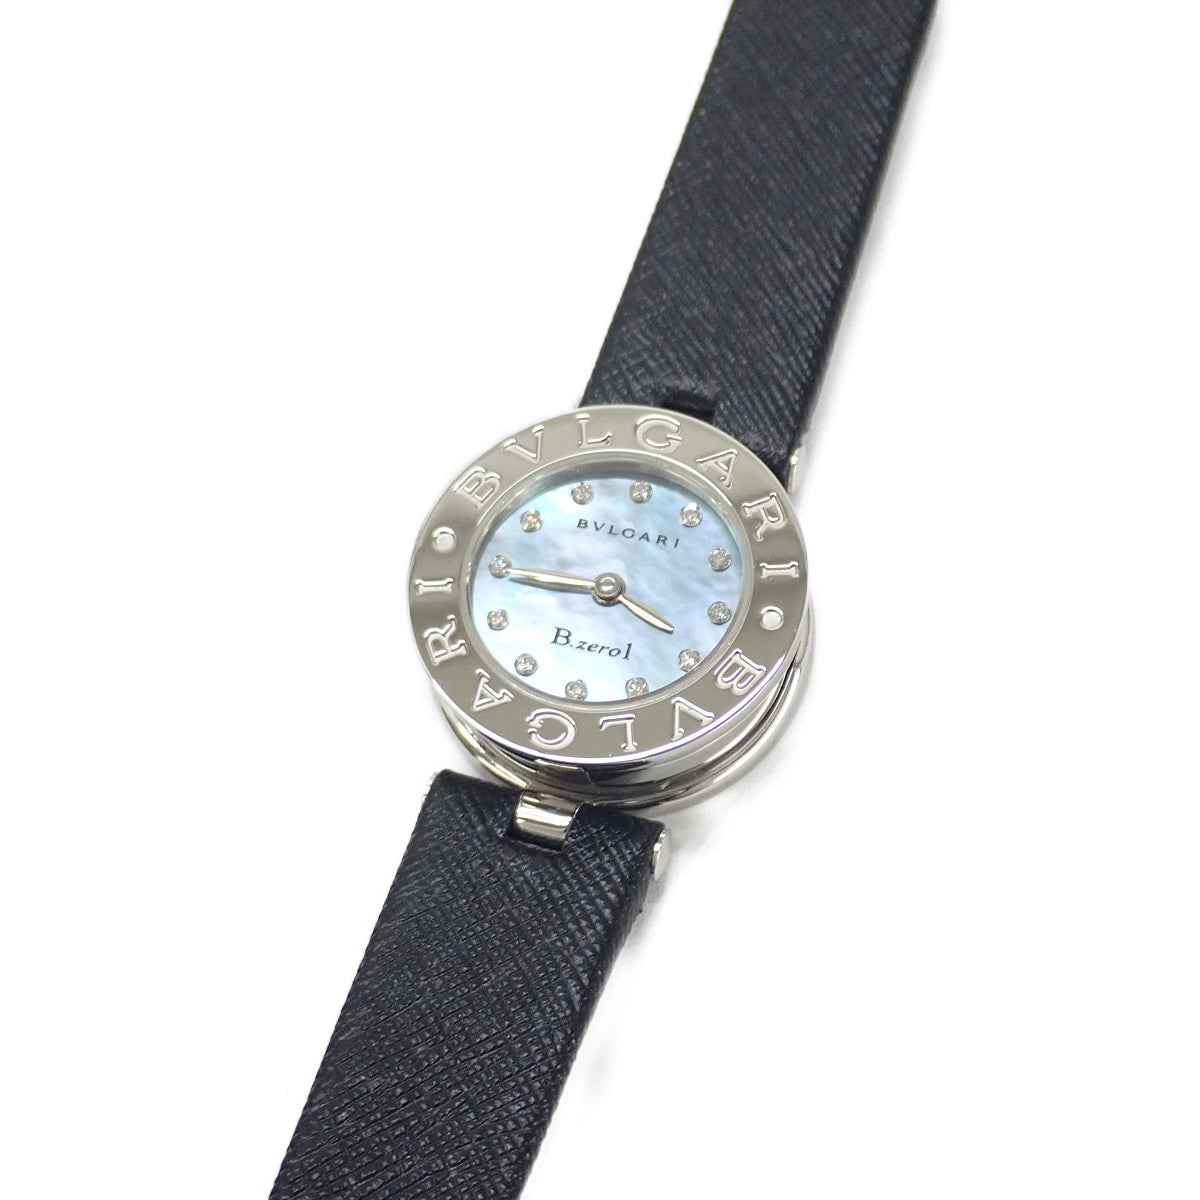 Bulgari Women's B-zero1 Watch BZ22S with Blue Shell Dial and 12P Diamond, Black Leather Strap (Pre-owned) BZ22BSL/12